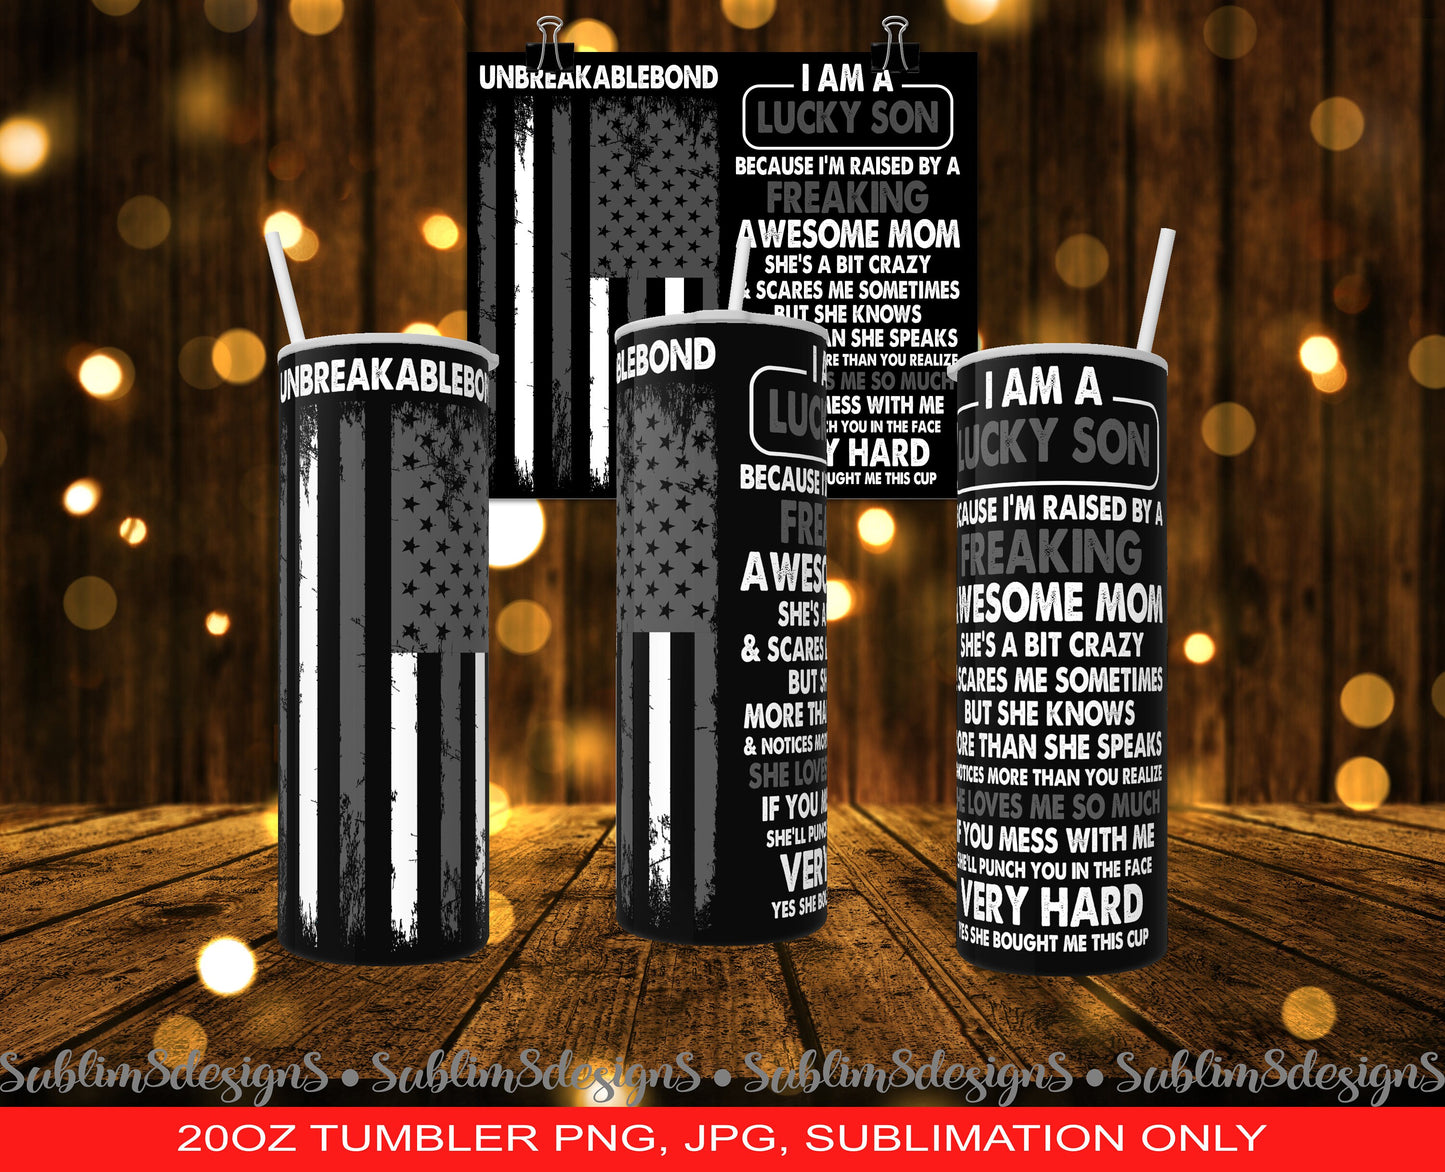 I Am A Lucky Son 20oz Tumbler PNG and JPG ONLY